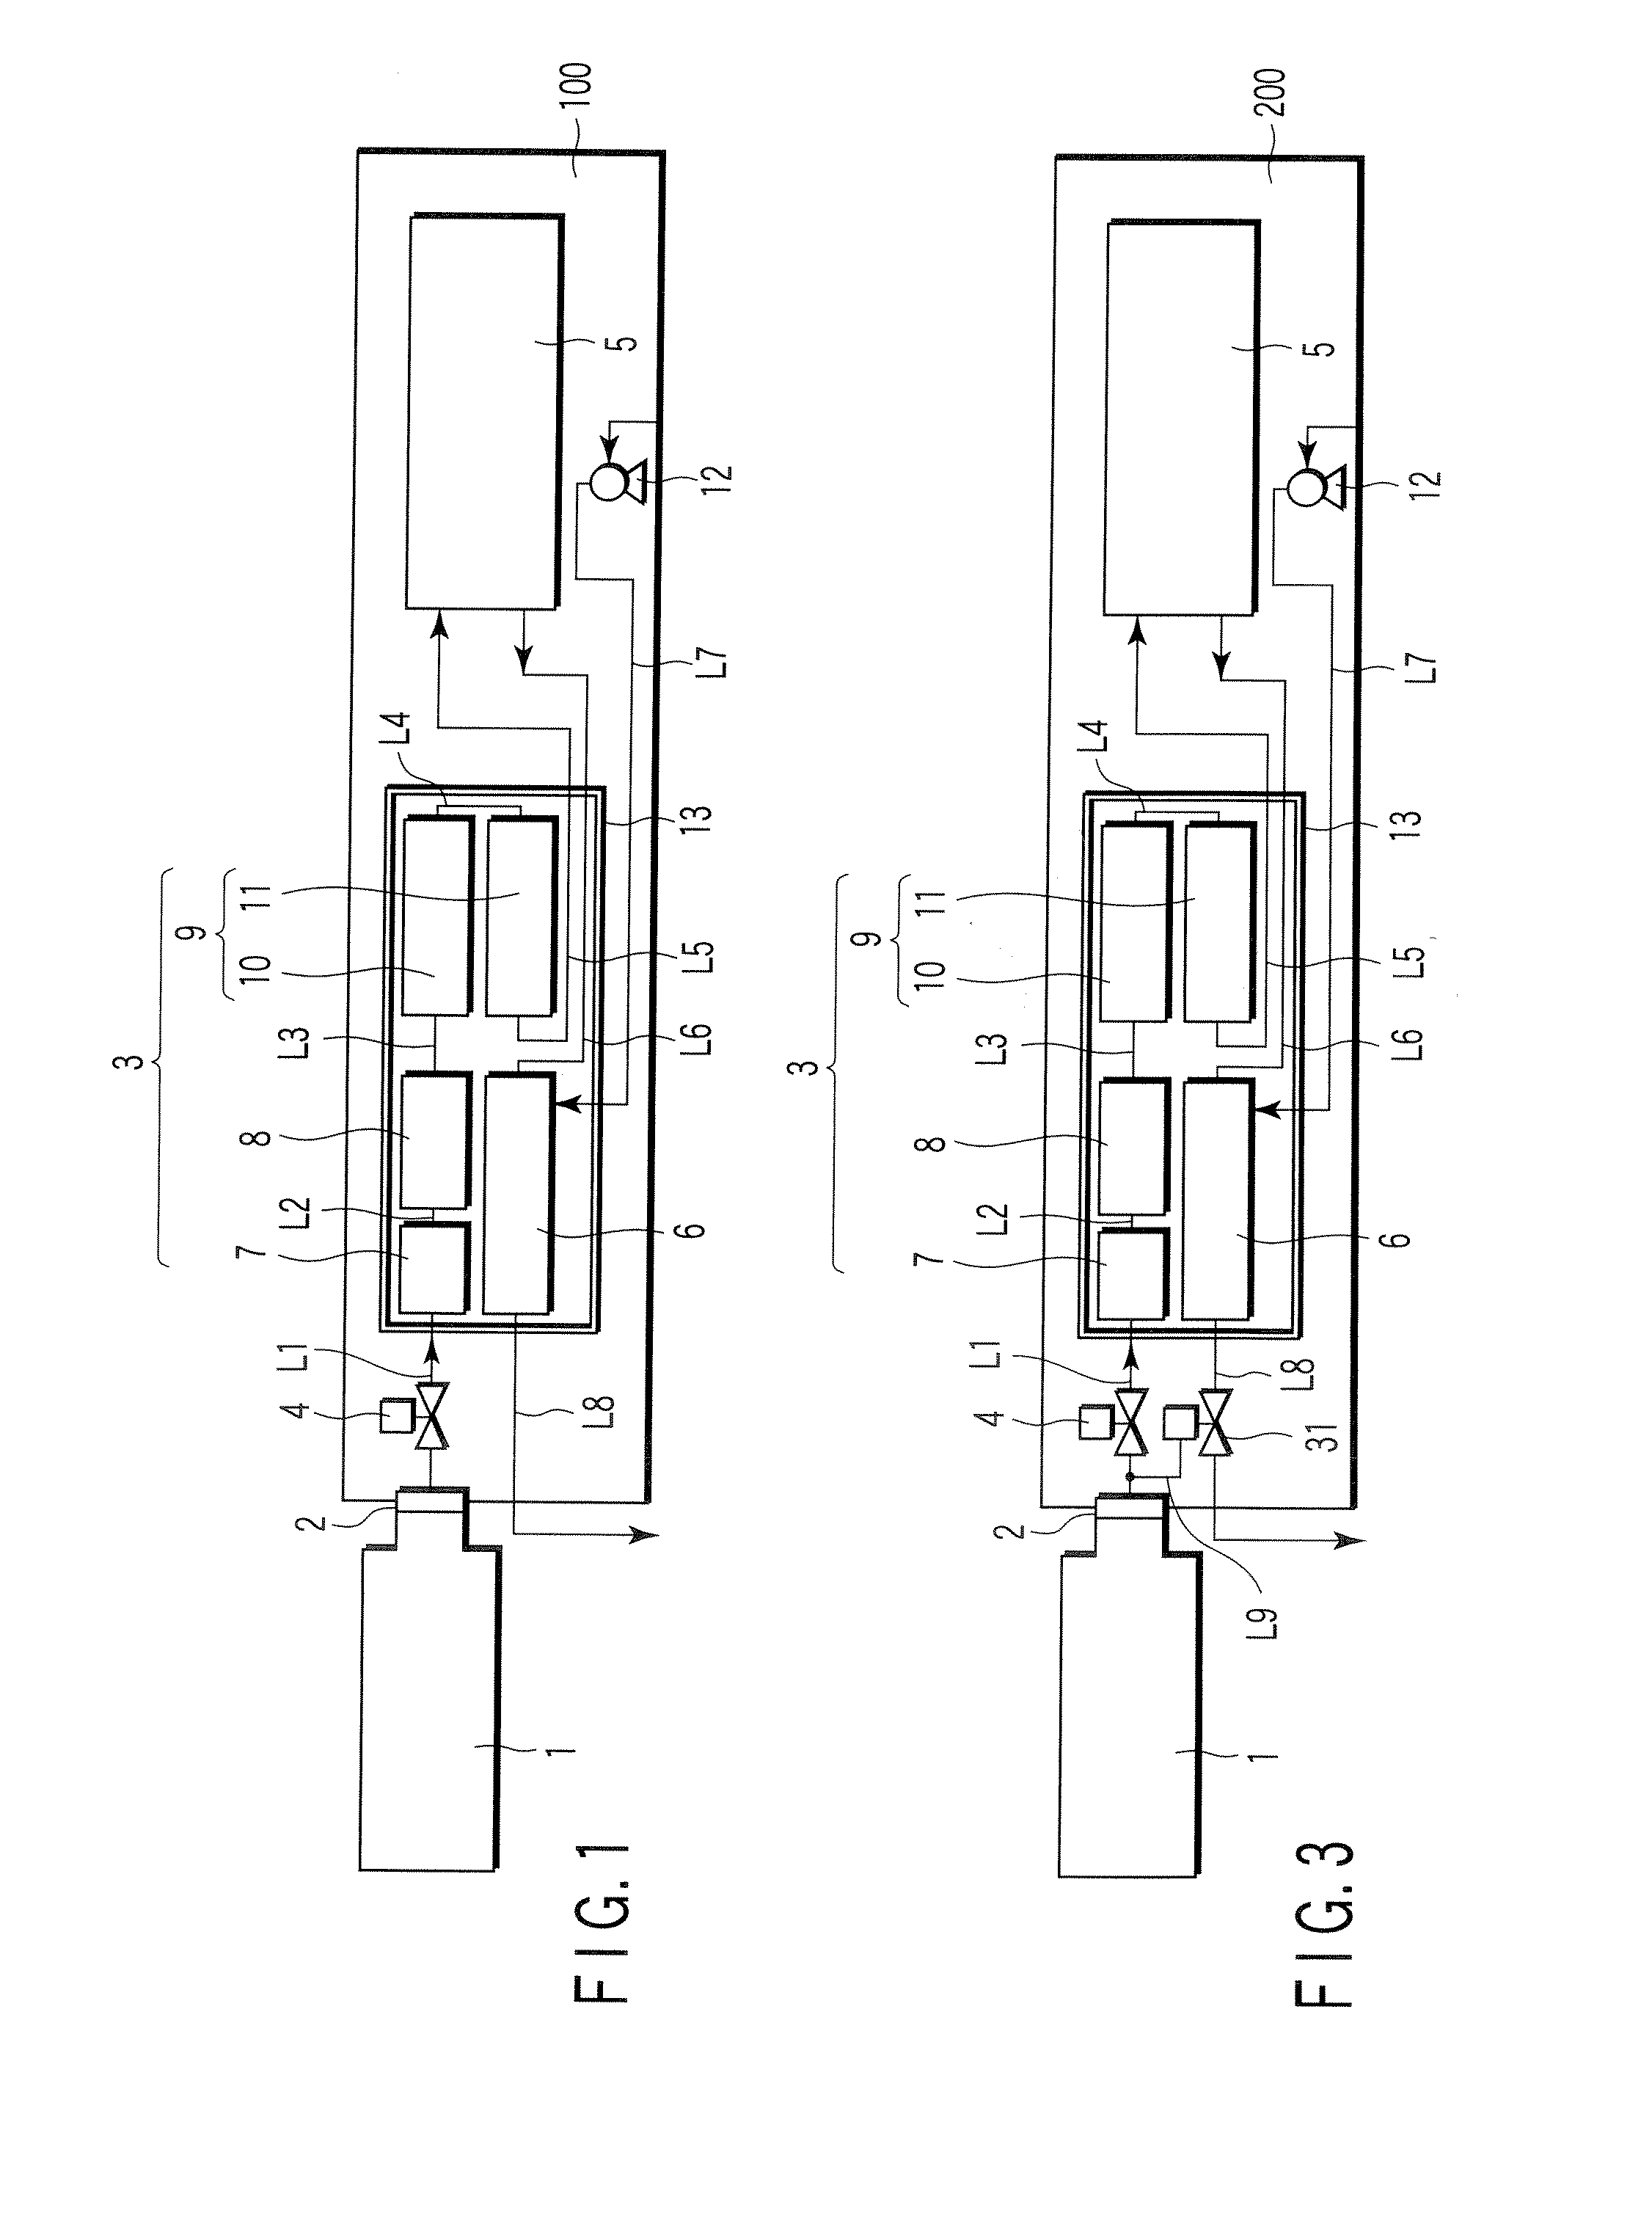 Chemical reactor and fuel cell system